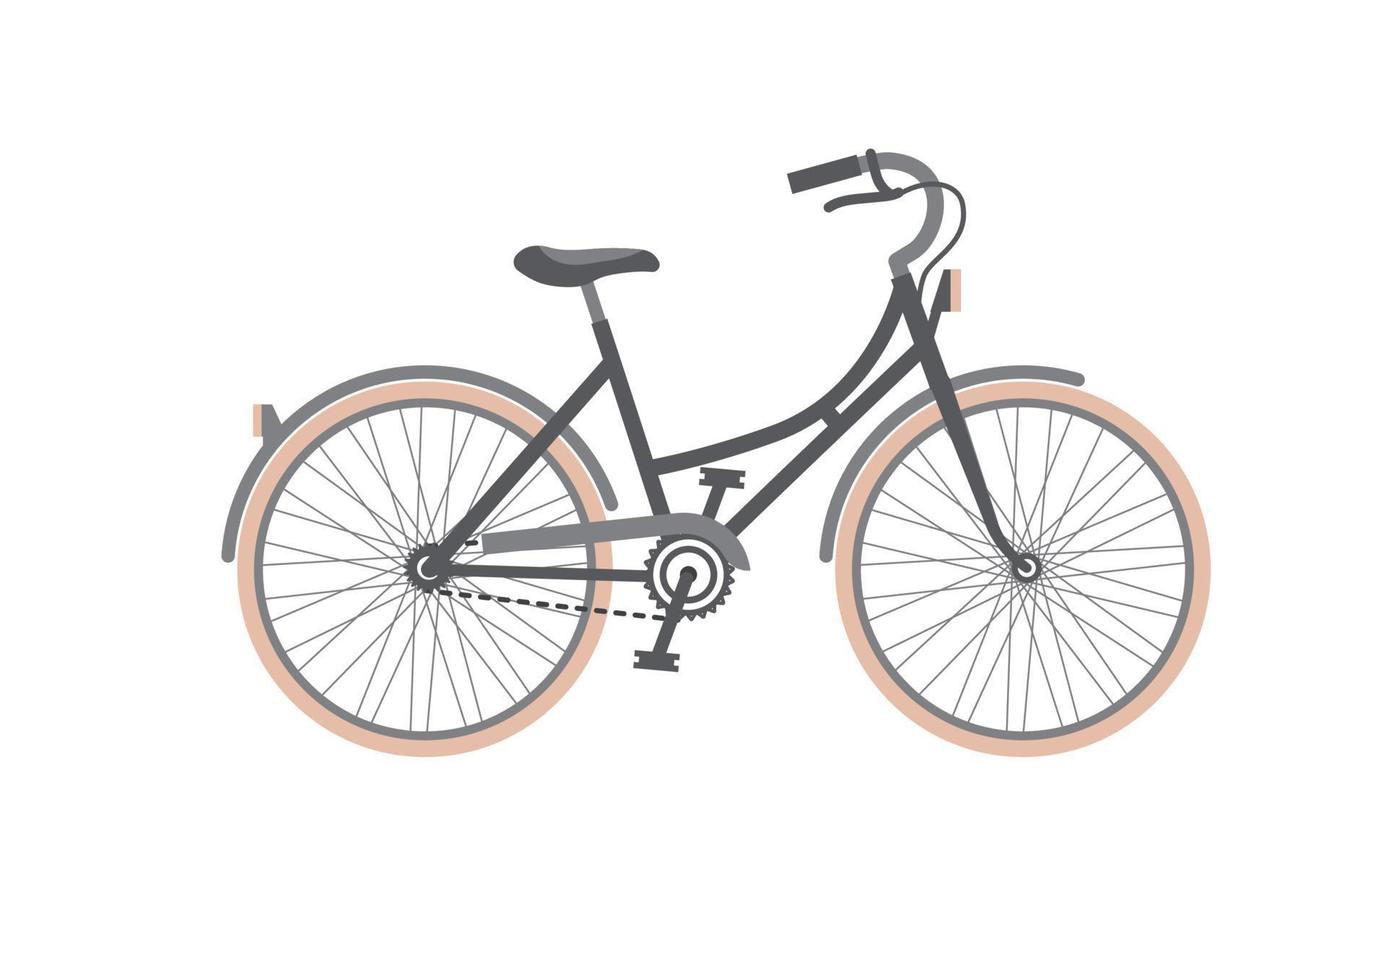 Old classic bicycle illustration vector